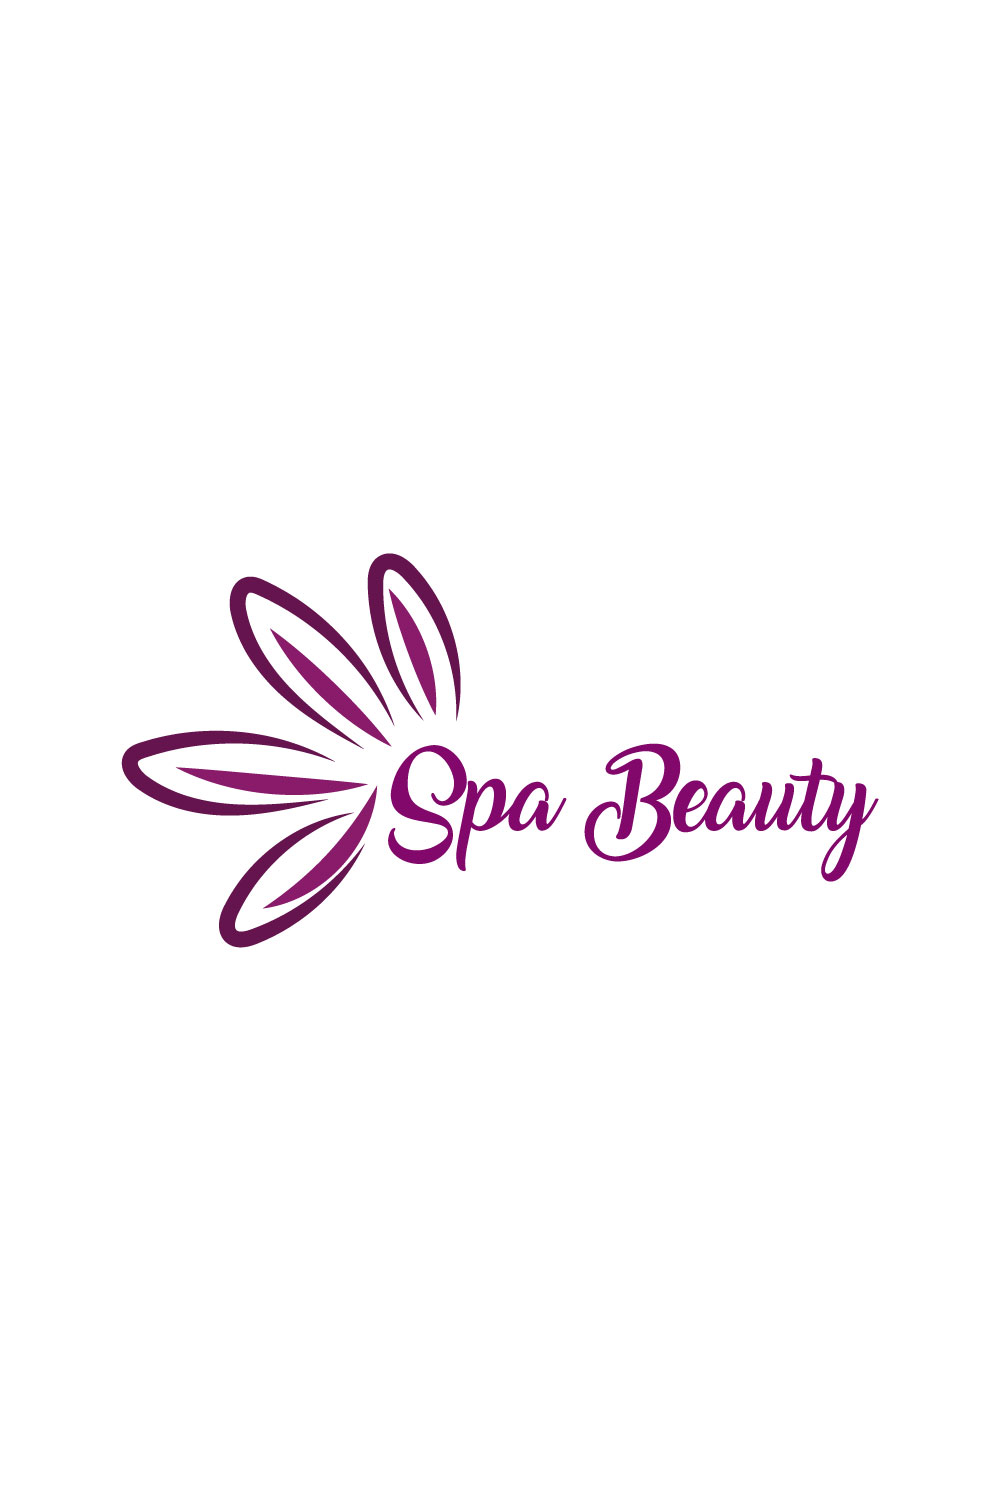 Free naturally spa logo pinterest preview image.